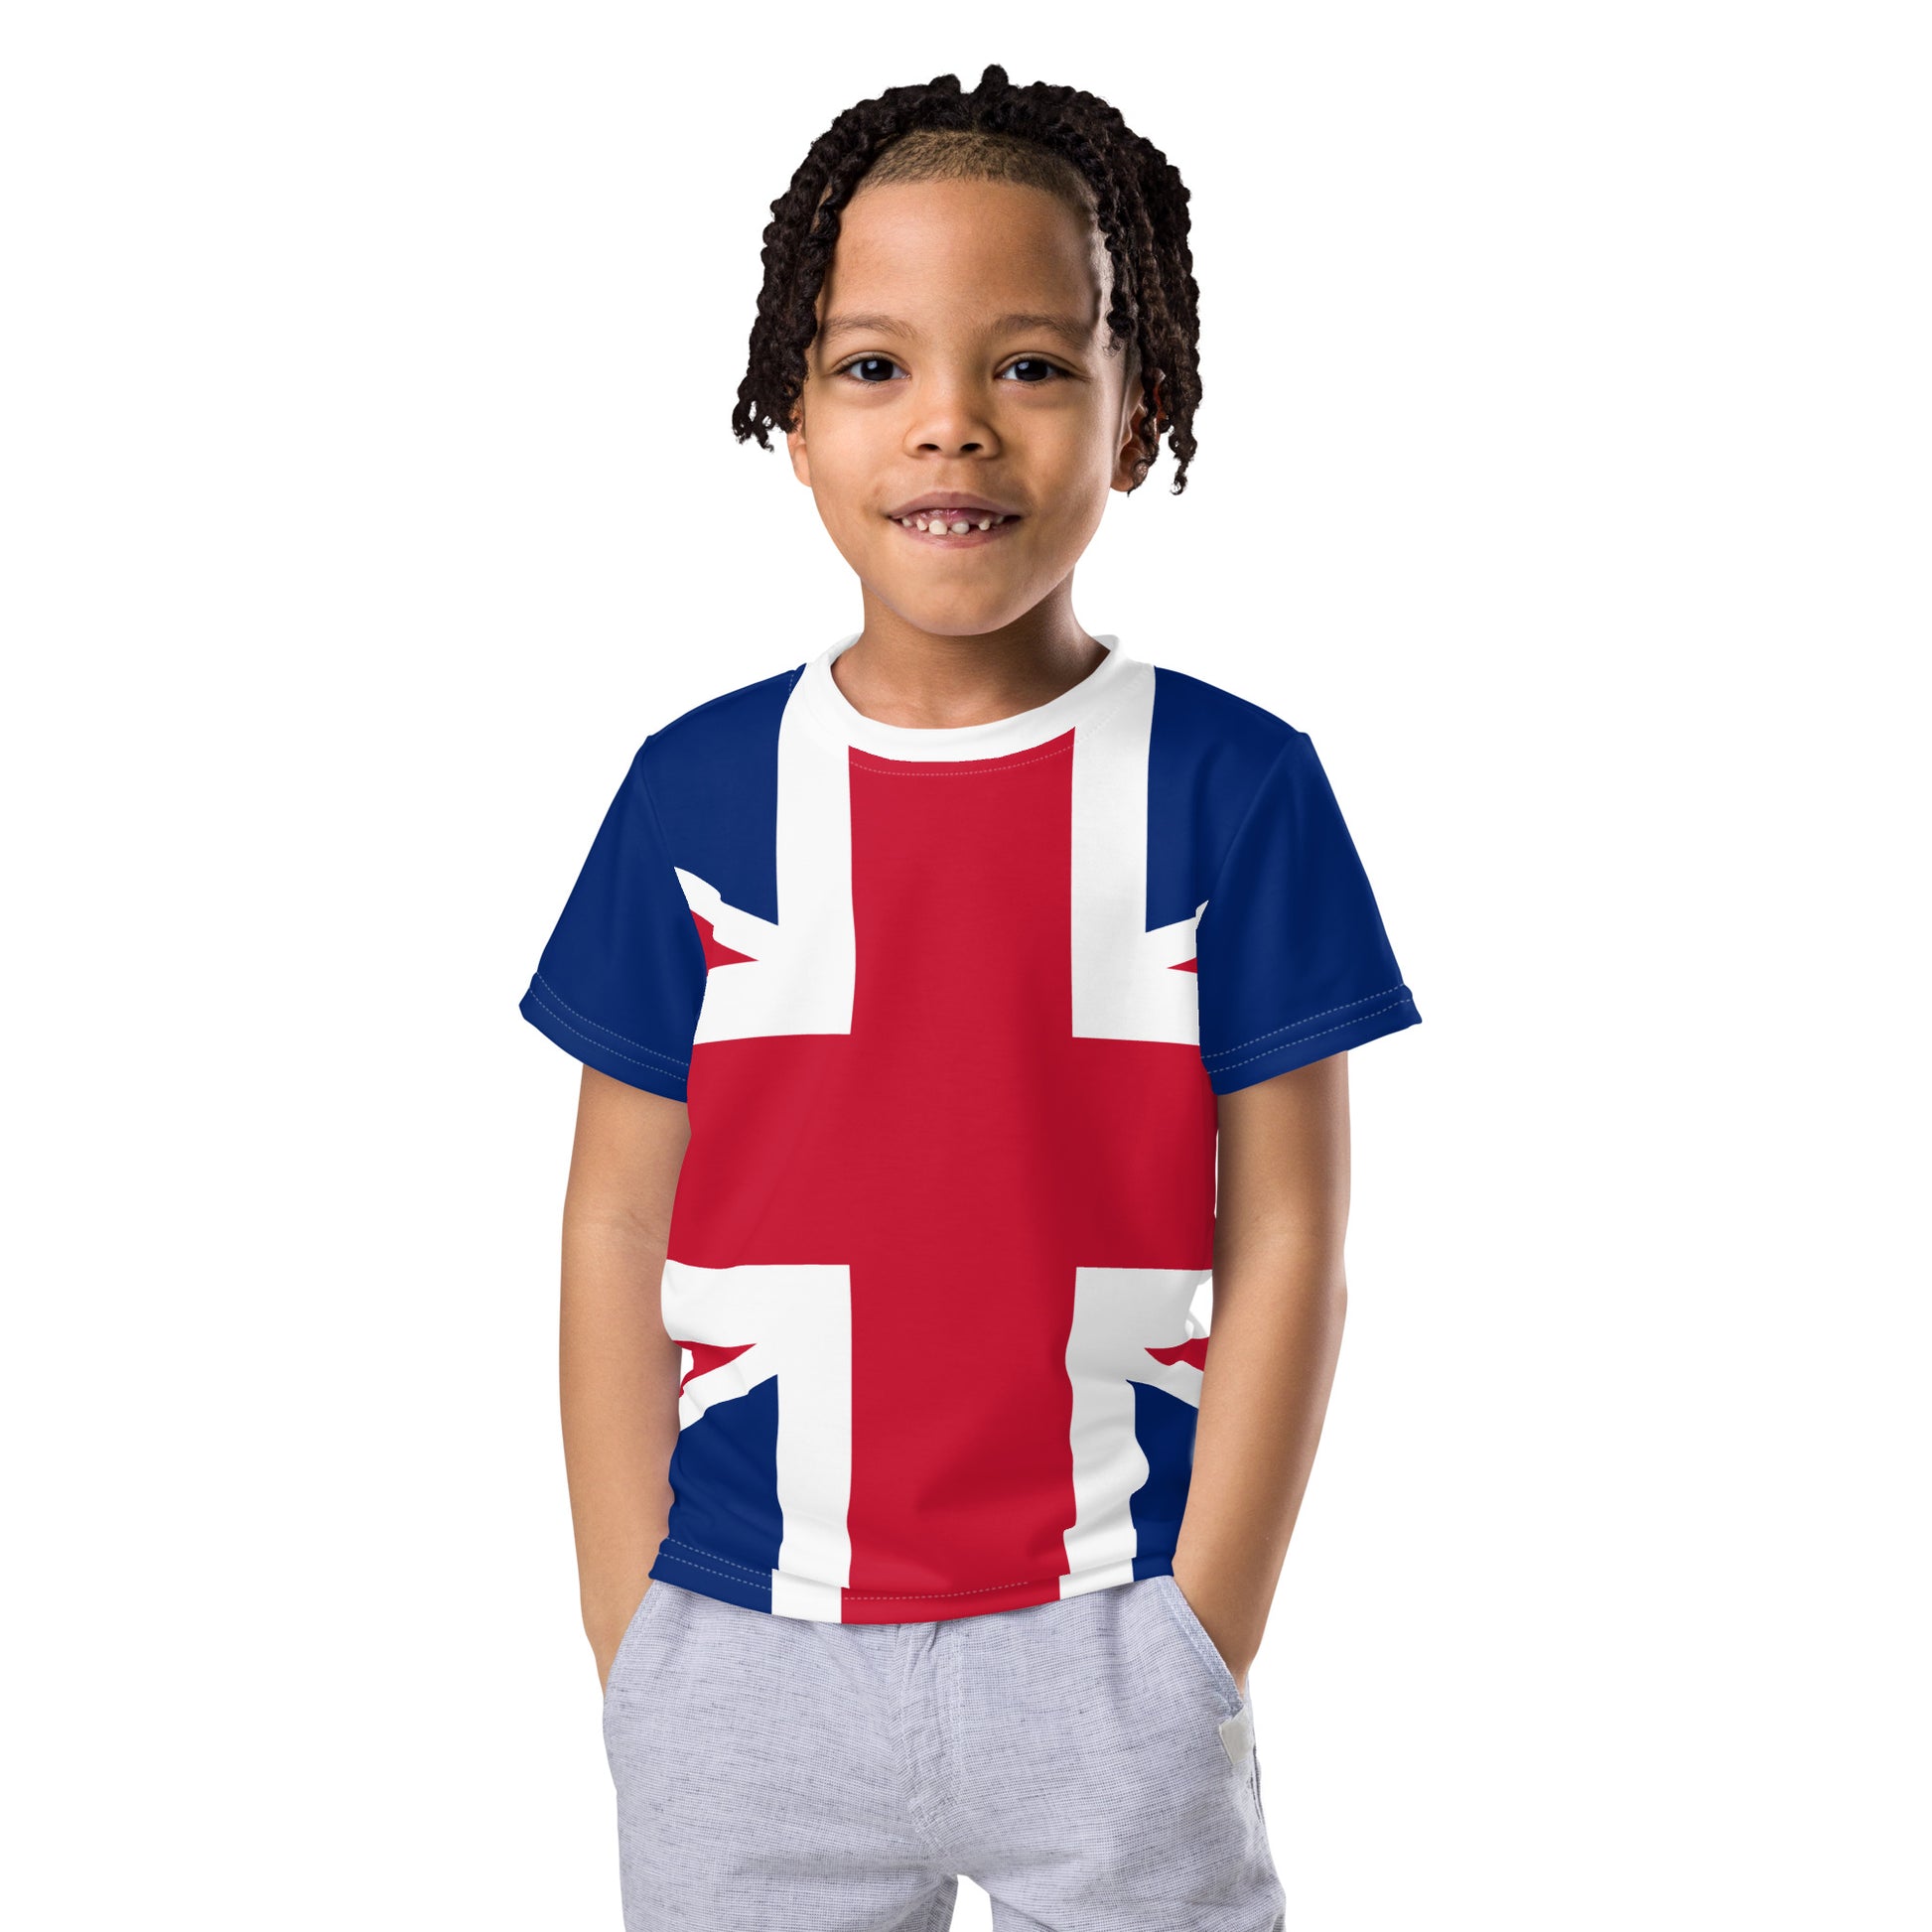 Kids Size Shirt Union Jack 2T to 7 For Boy